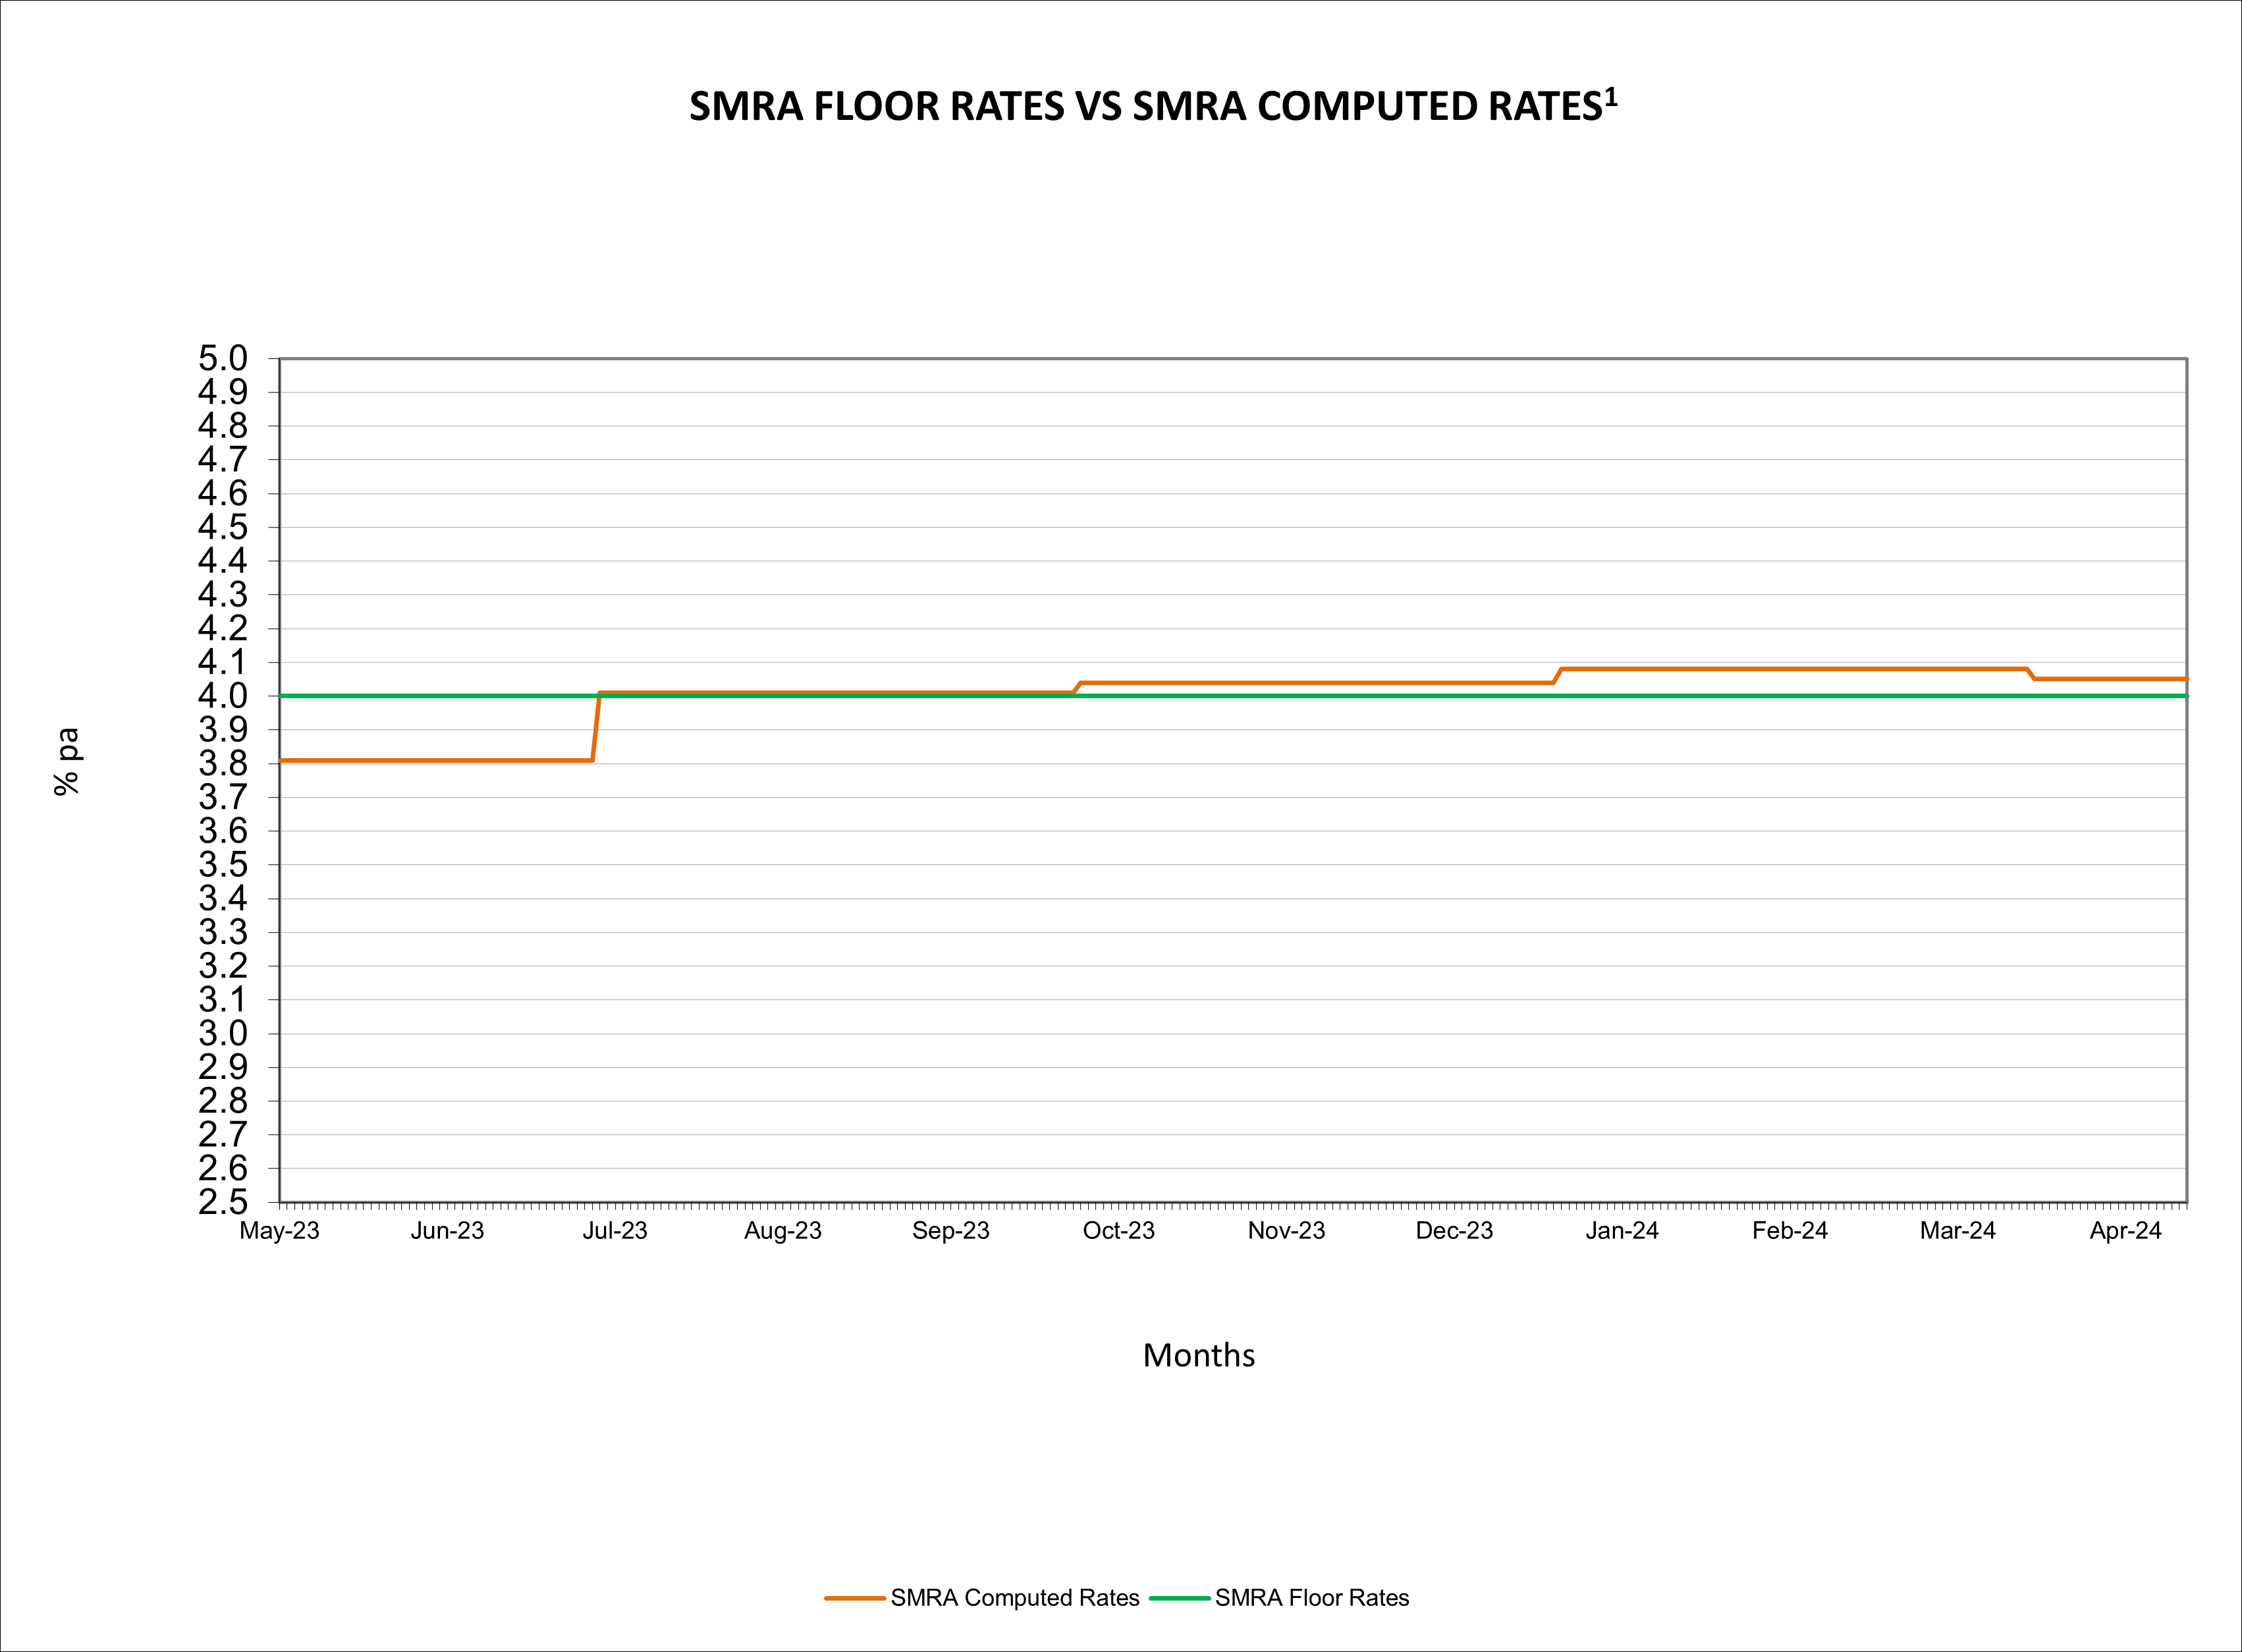 SMRA Floor Rates vs SMRA Computed Rates